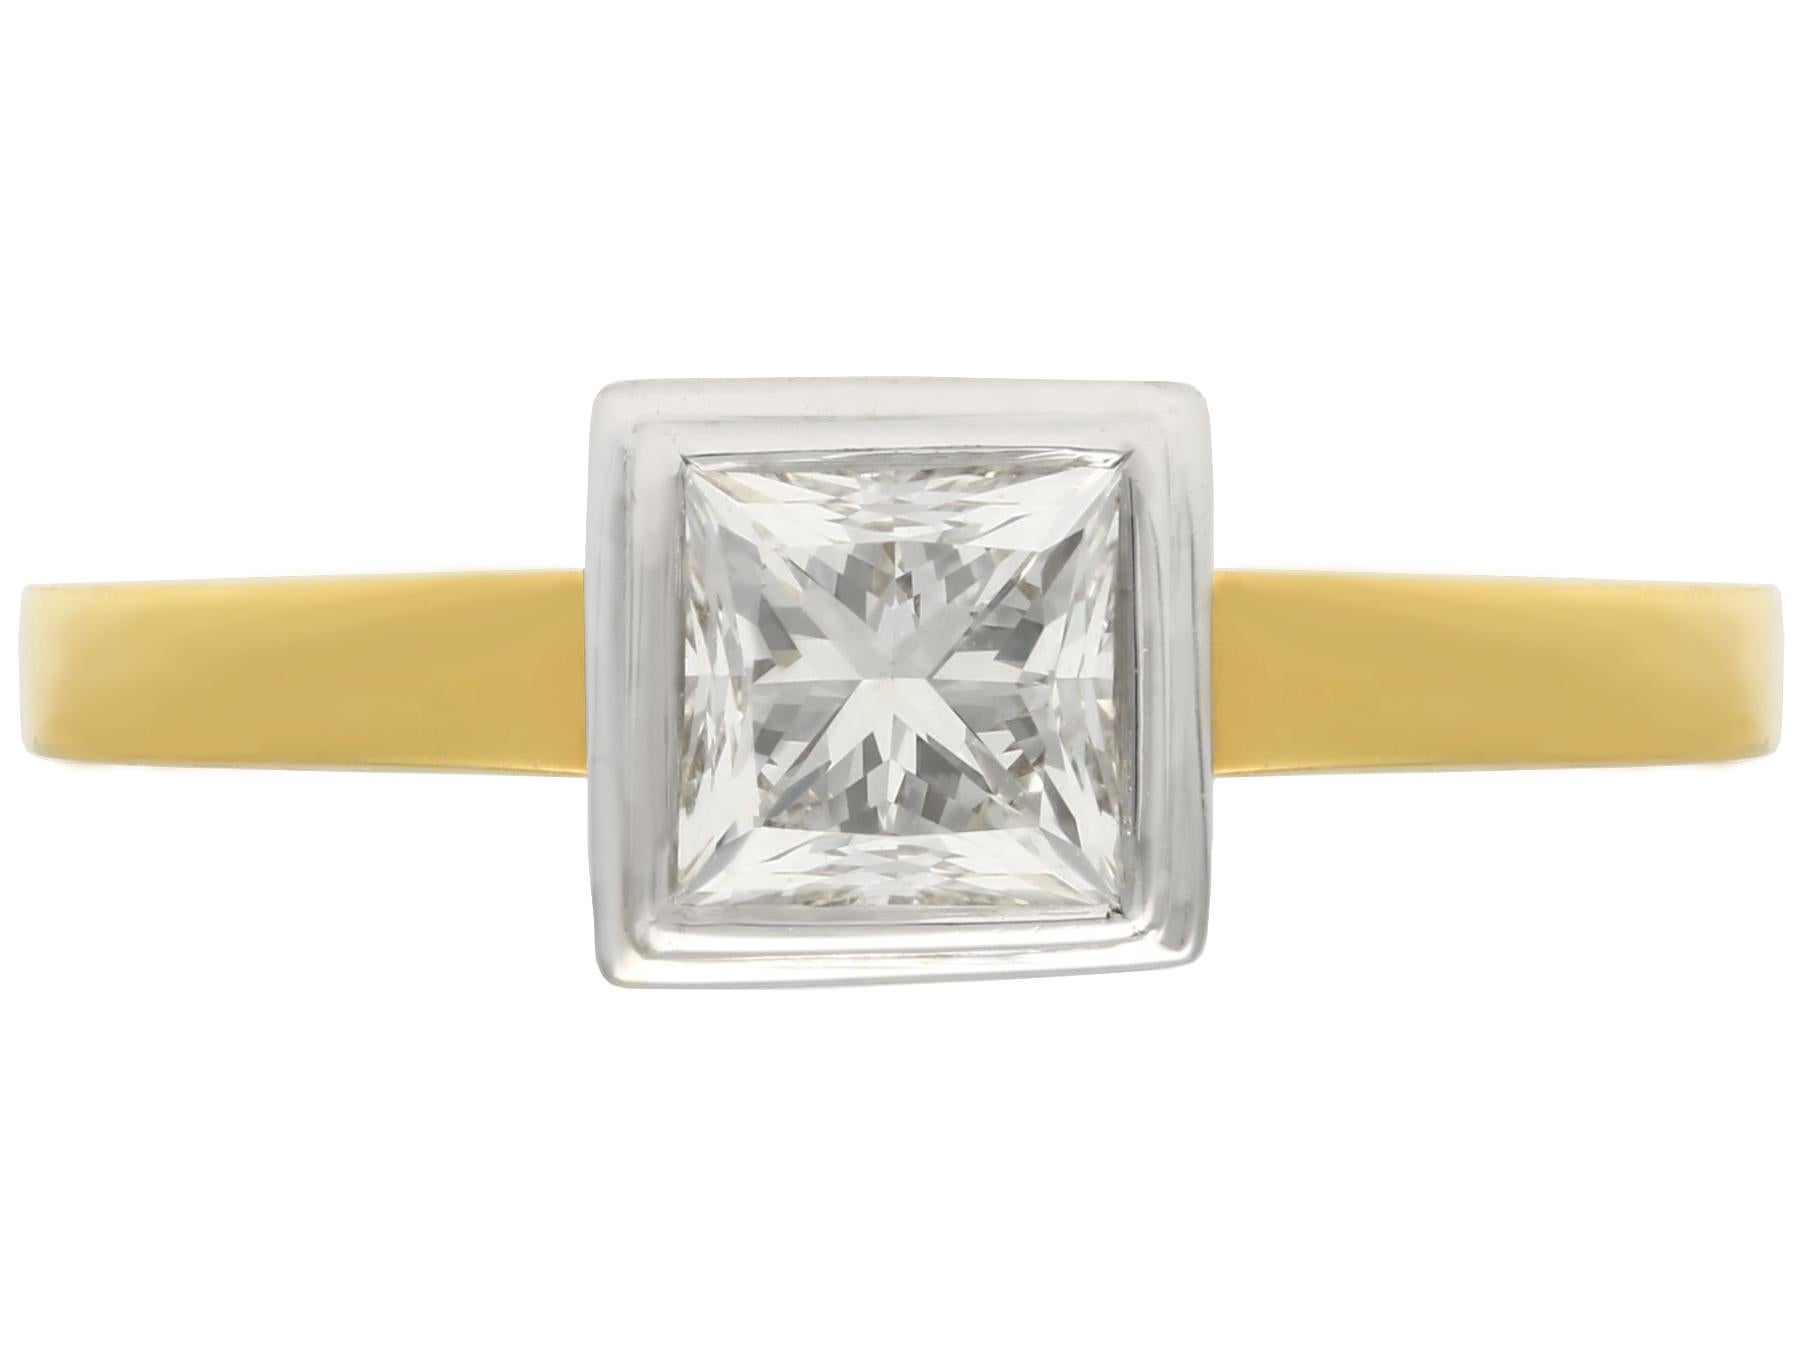 Princess Cut 1.10 Carat Diamond Yellow Gold Solitaire Engagement Ring In Excellent Condition For Sale In Jesmond, Newcastle Upon Tyne